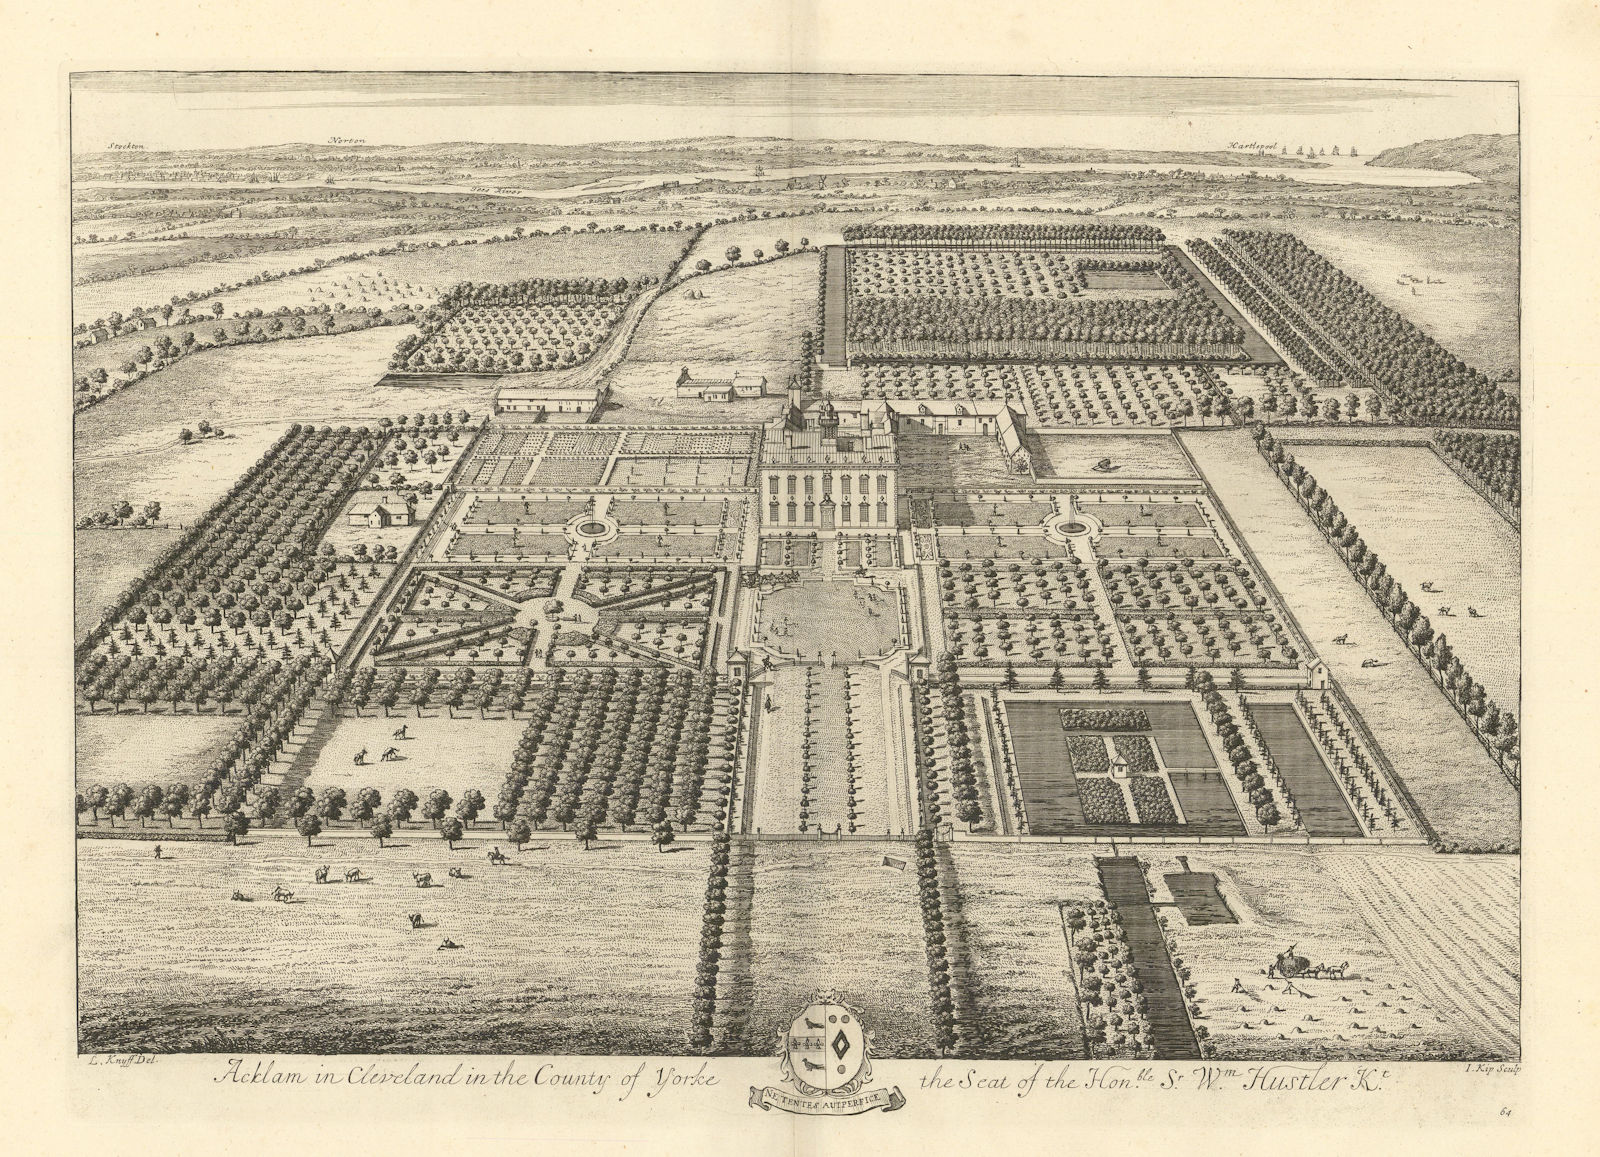 Associate Product Acklam Hall, Middlesbrough College by Kip & Knyff. "Acklam in Cleveland" 1709